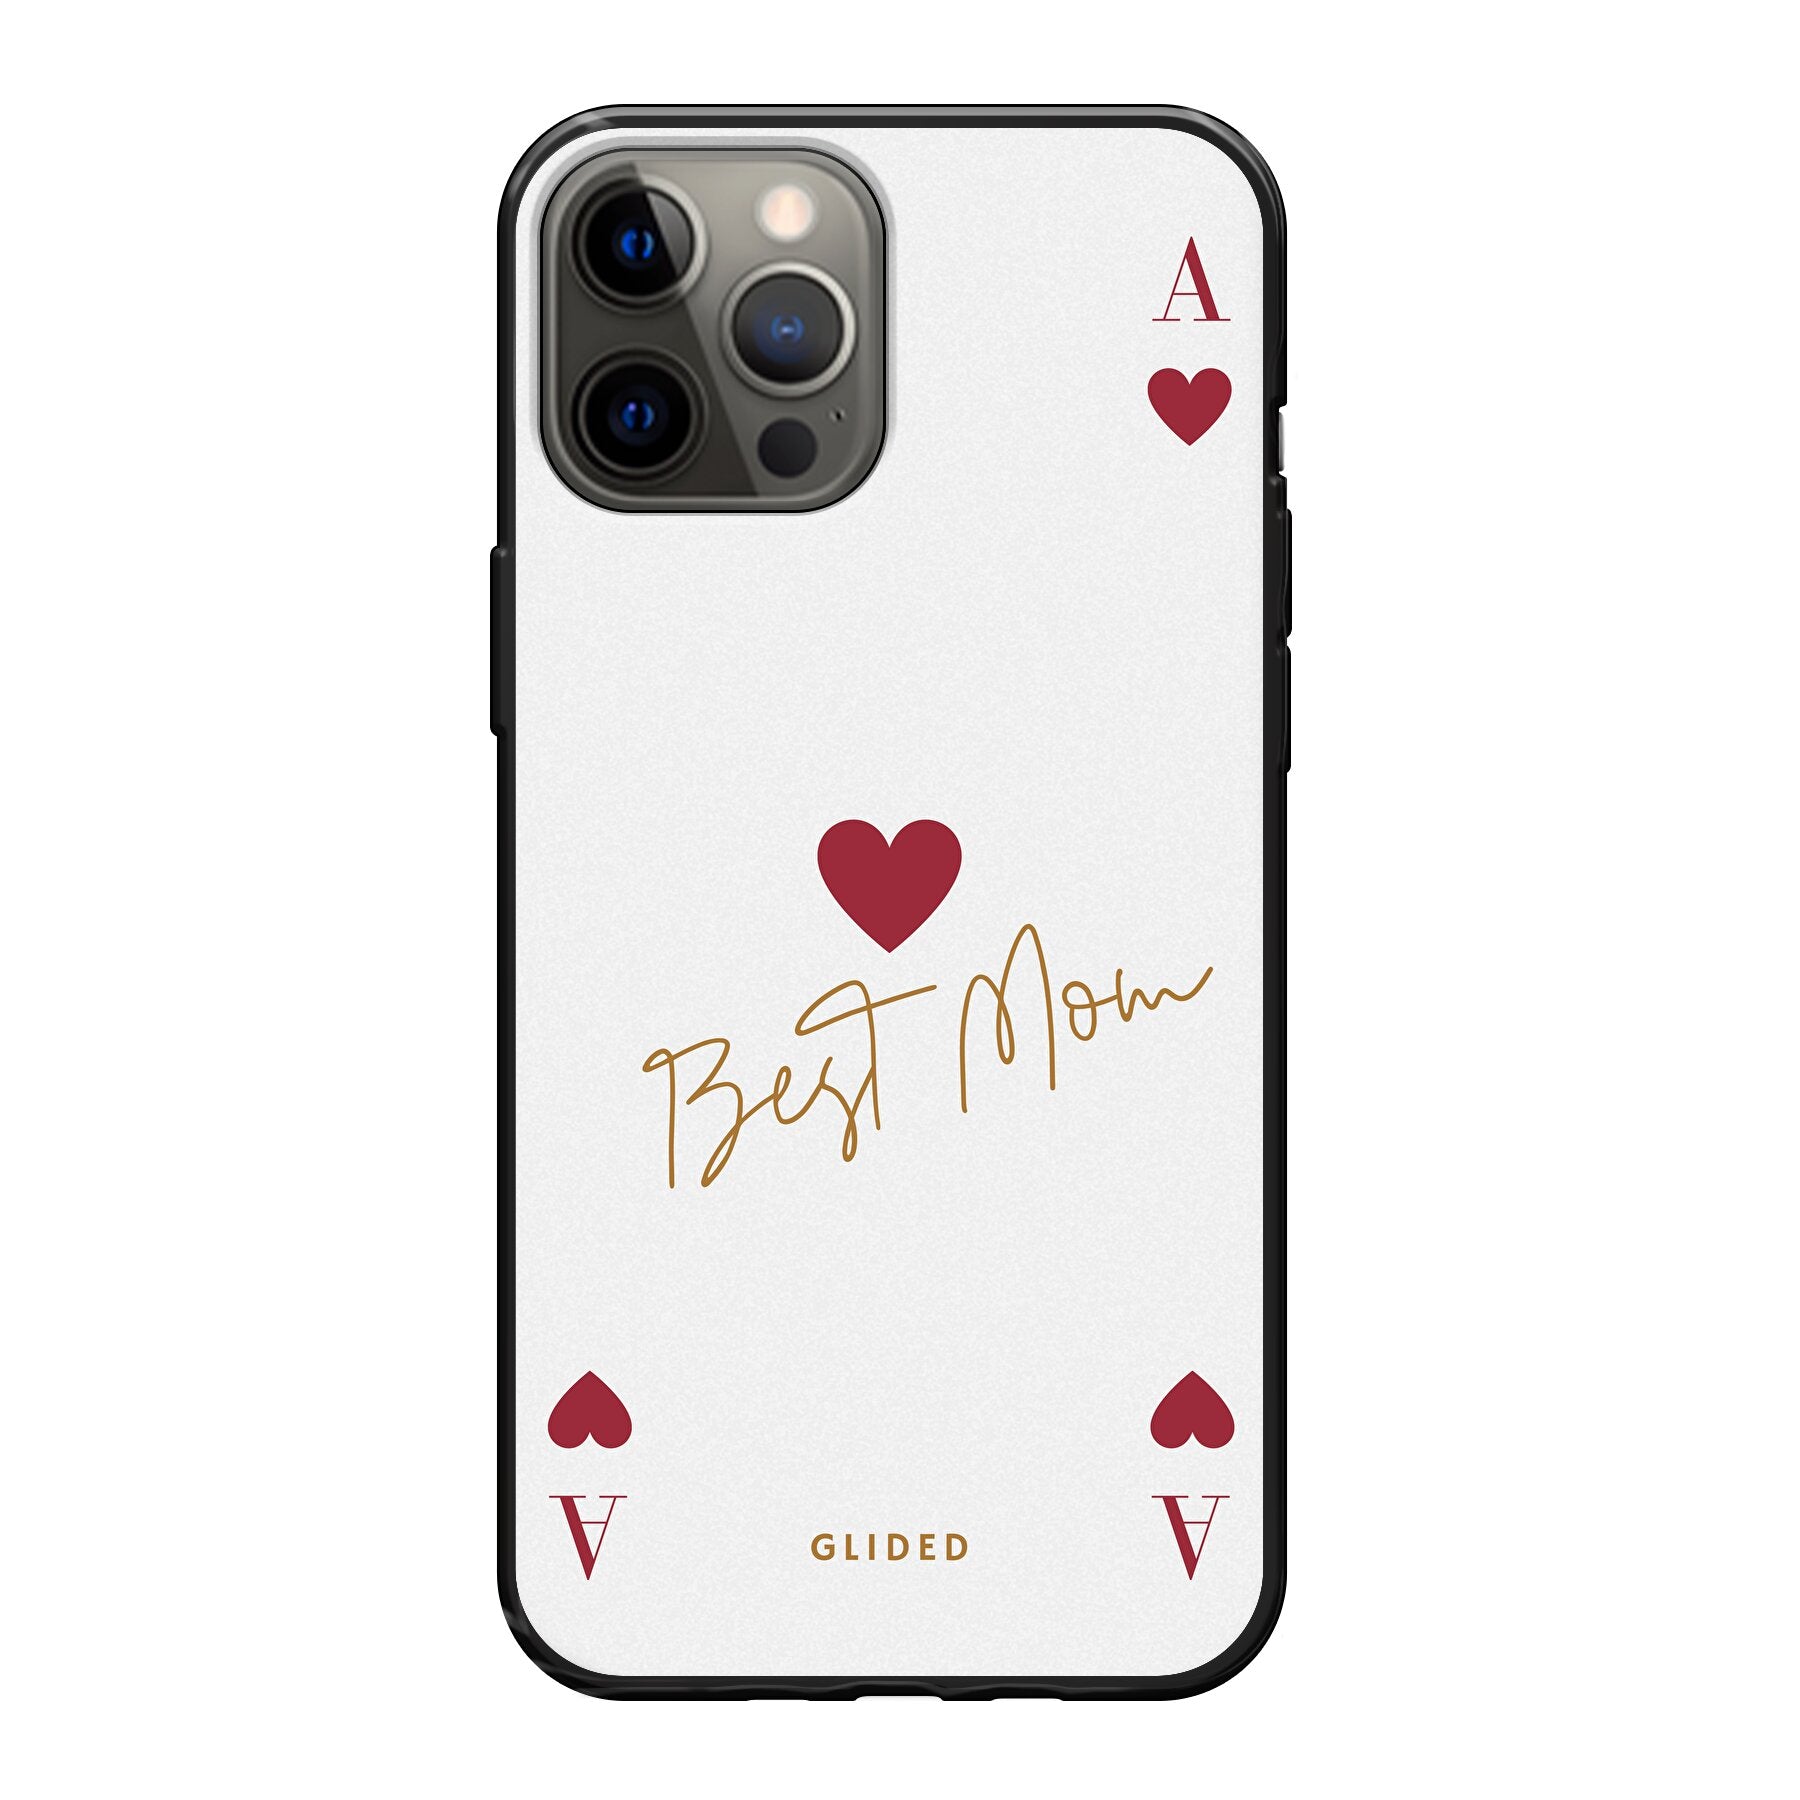 Mom's Game - iPhone 12 Pro Max - Soft case